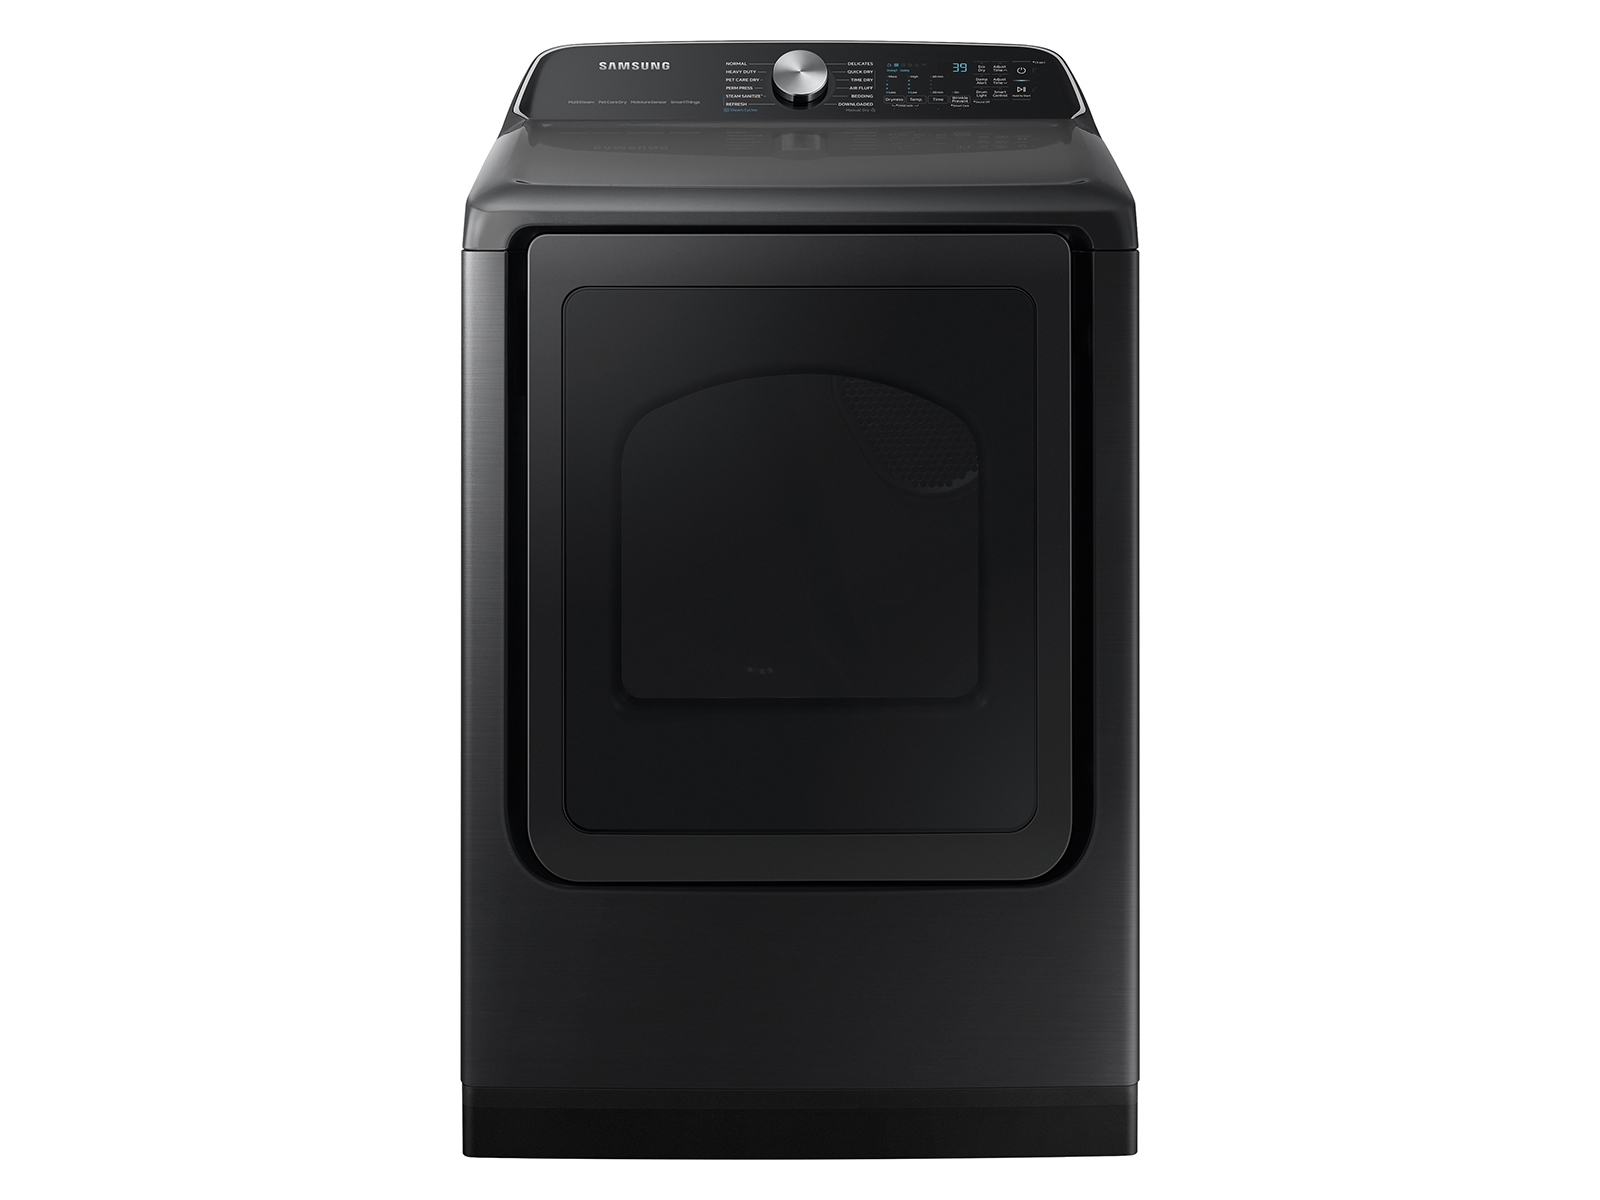 Photos - Tumble Dryer Samsung 7.4 cu. ft. Smart Electric Dryer with Steam Sanitize+ in Brushed B 